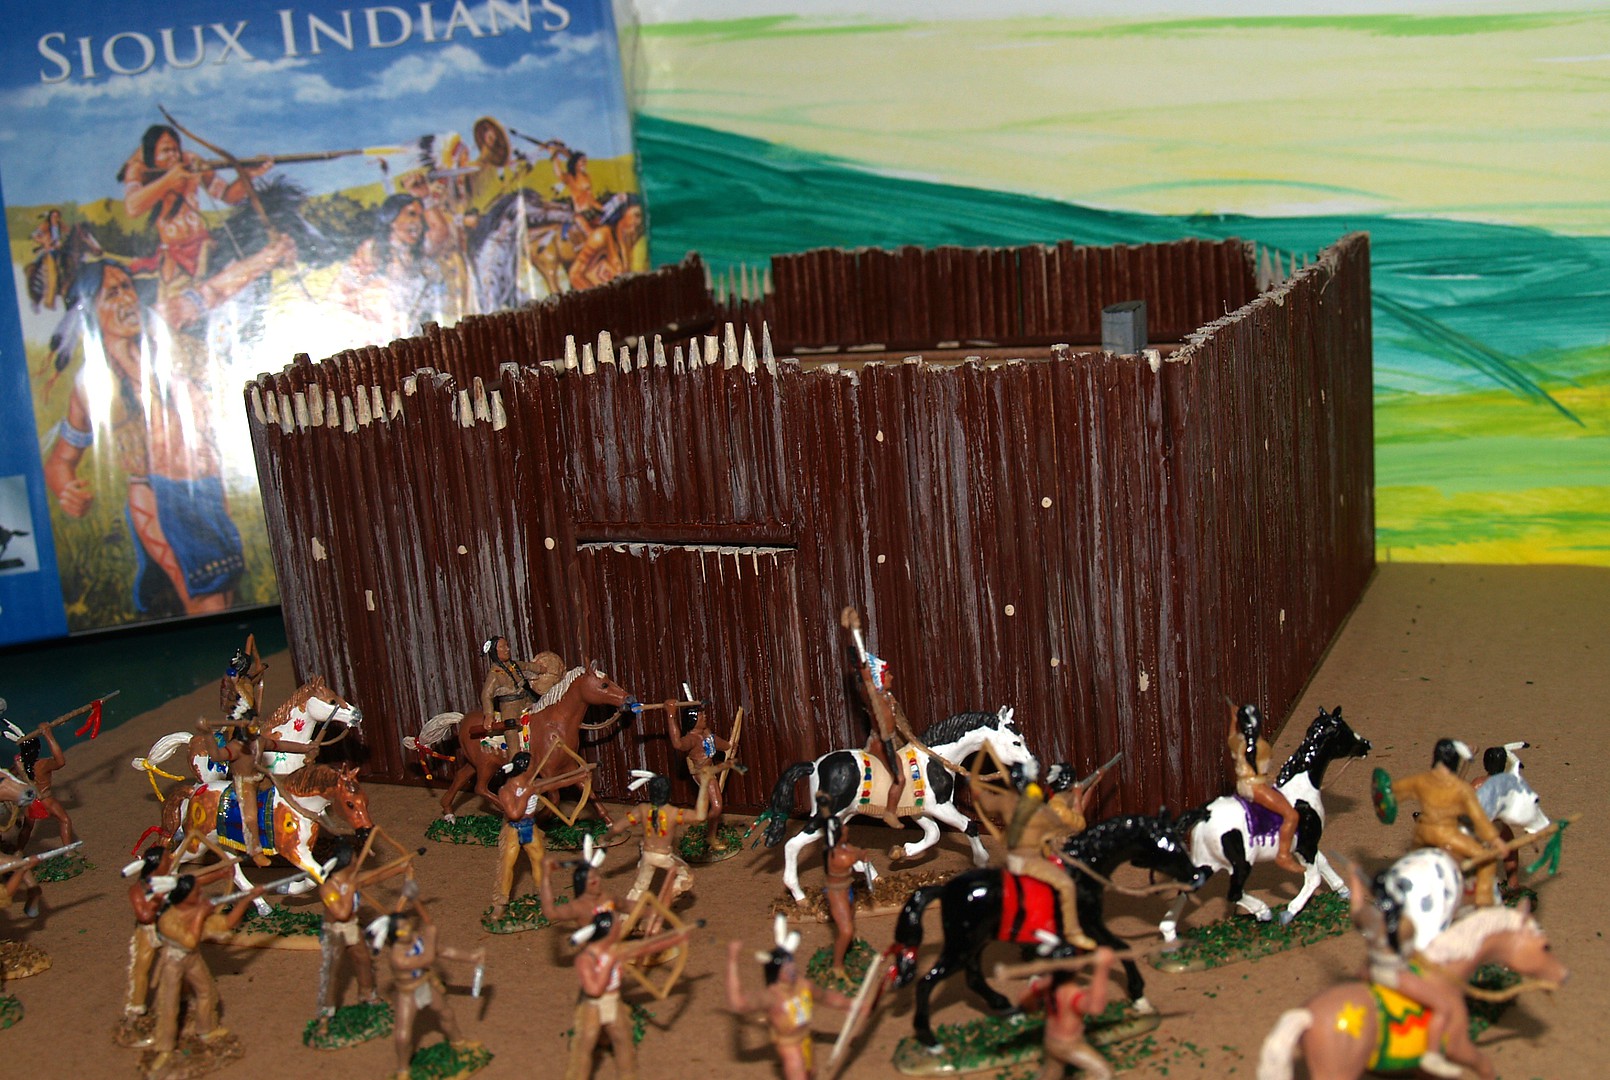 Imex 1/72 Sioux Indians # 508 